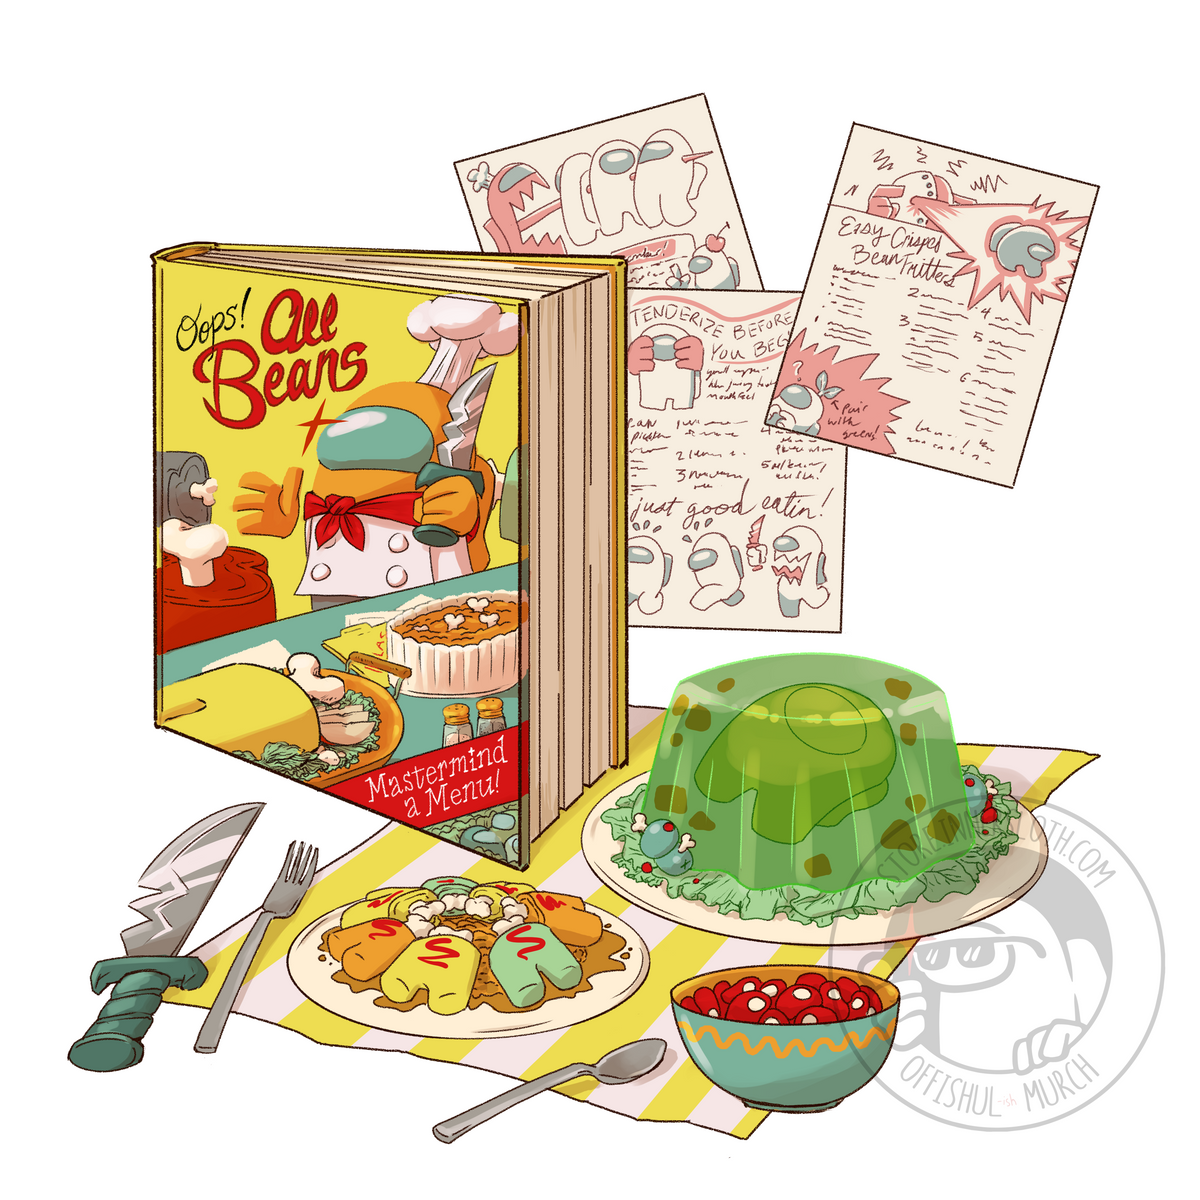 A composite illustration Katie McDermott of a dead Crewmate-style feast. There&#39;s a yellow cookbook that says &quot;Oops! All beans, Mastermind a Menu.&quot; The cover has an Orange Impostor chef holding a knife. There are three cookbook pages behind the book depicting different ways to cook Crewmates. At the center and bottom of the image, are several food items, like a Crewmate suspended in jello and a bowl full of beans, laid out on a yellow and white checkered tablecloth surrounded by cutlery and one big dagger.